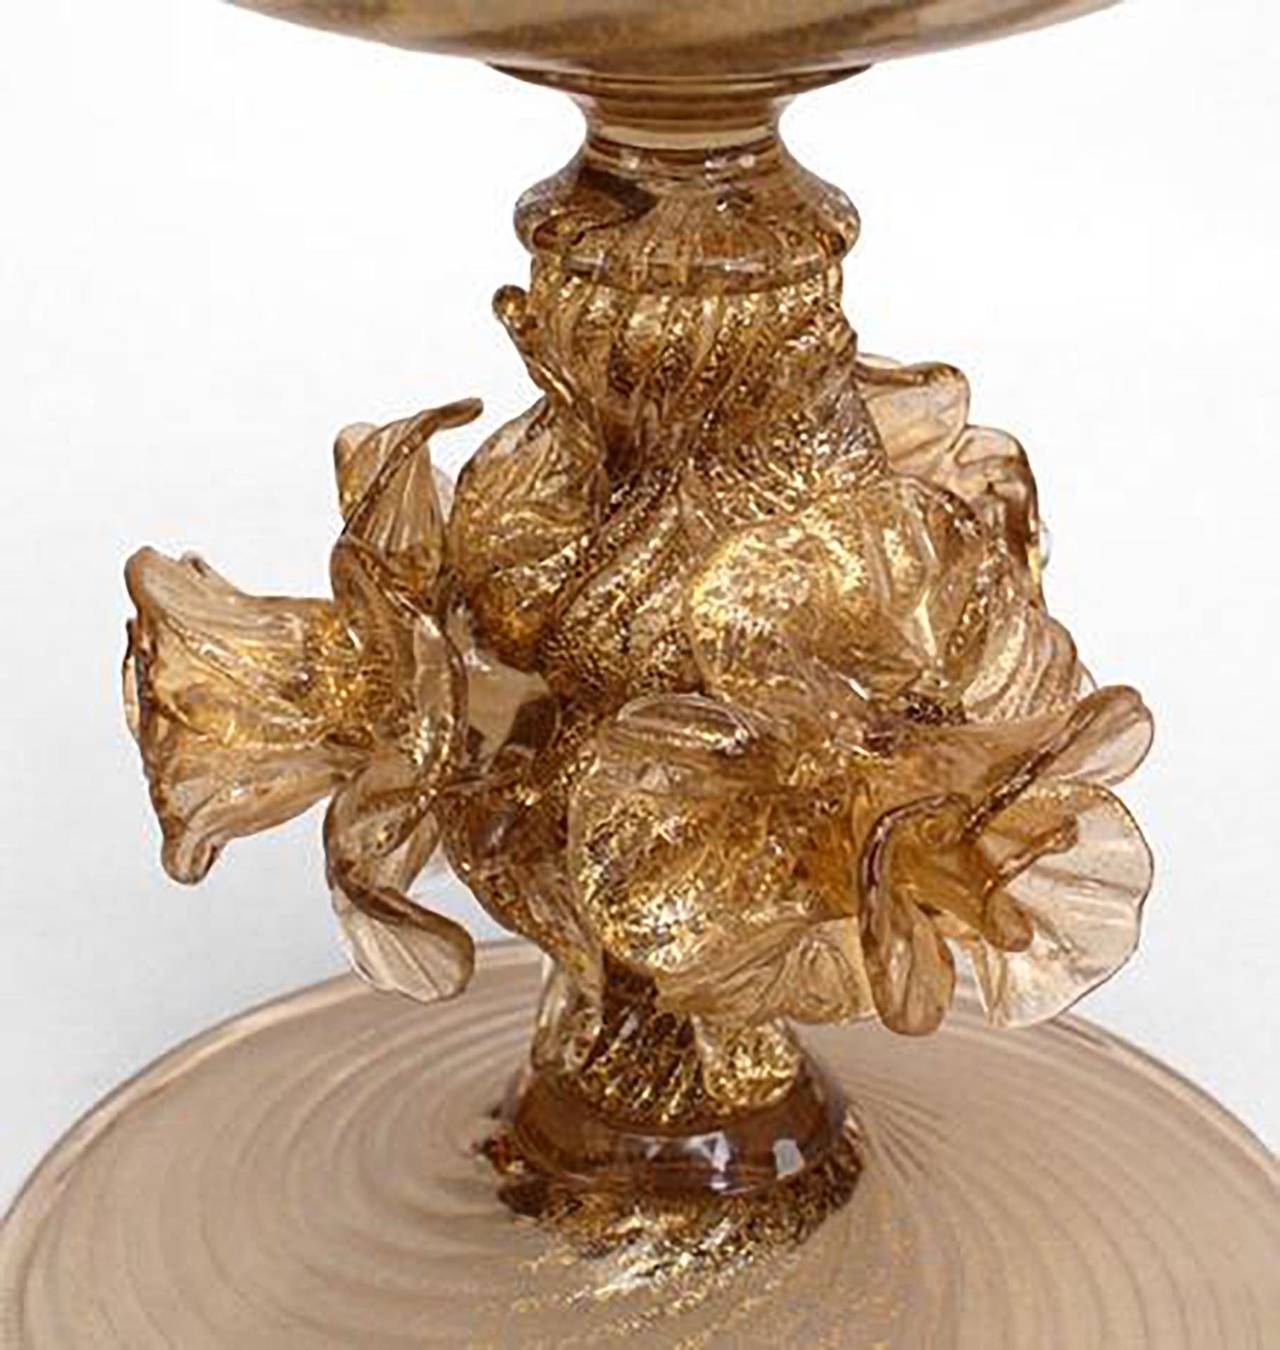 1940's Italian Murano gold dusted blown glass compote with a spiral design and
floral trim on its stem.